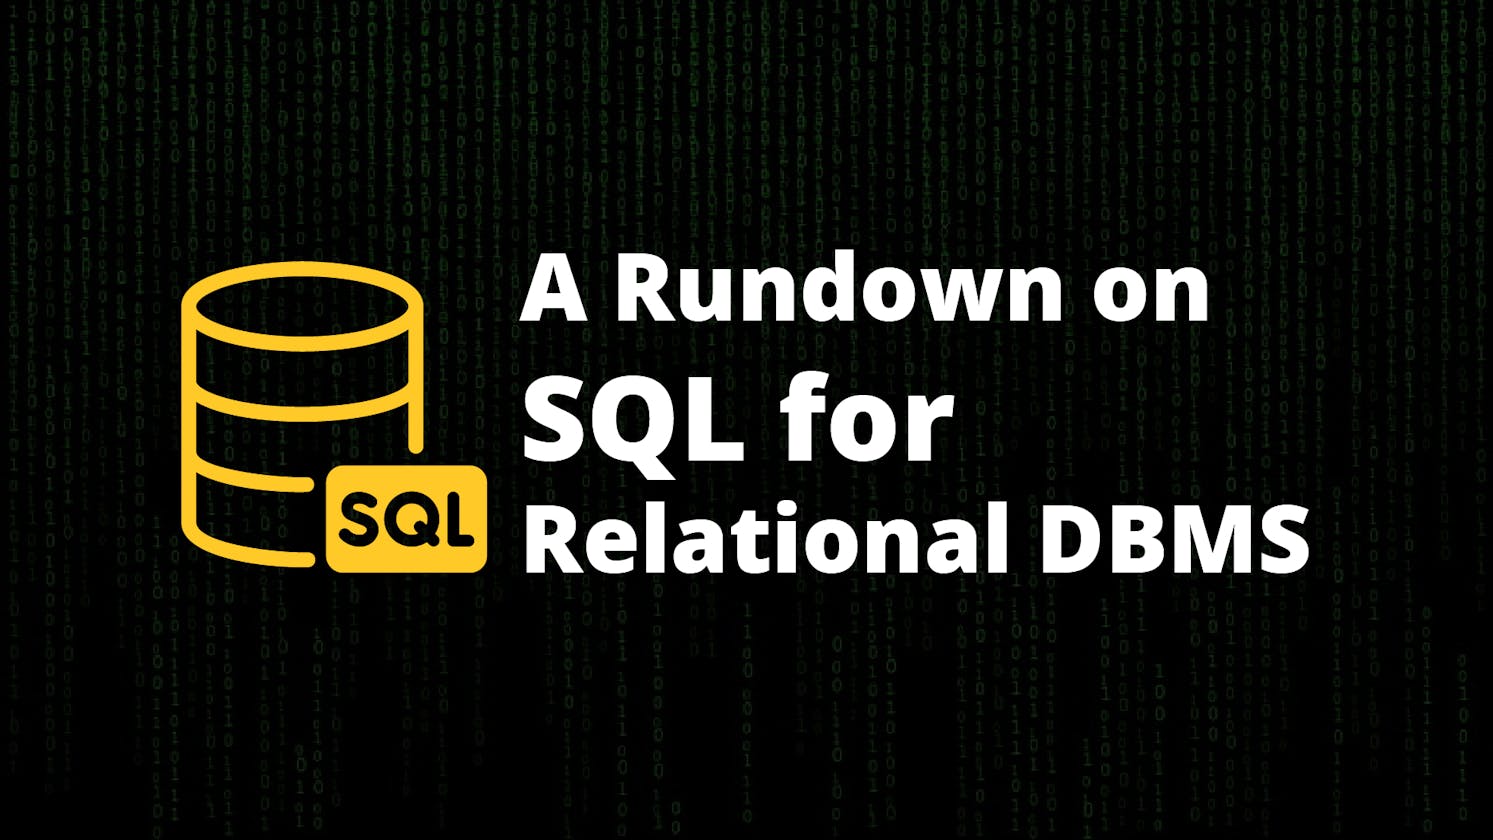 A Rundown on Structured Query Language for Relational Database Management Systems